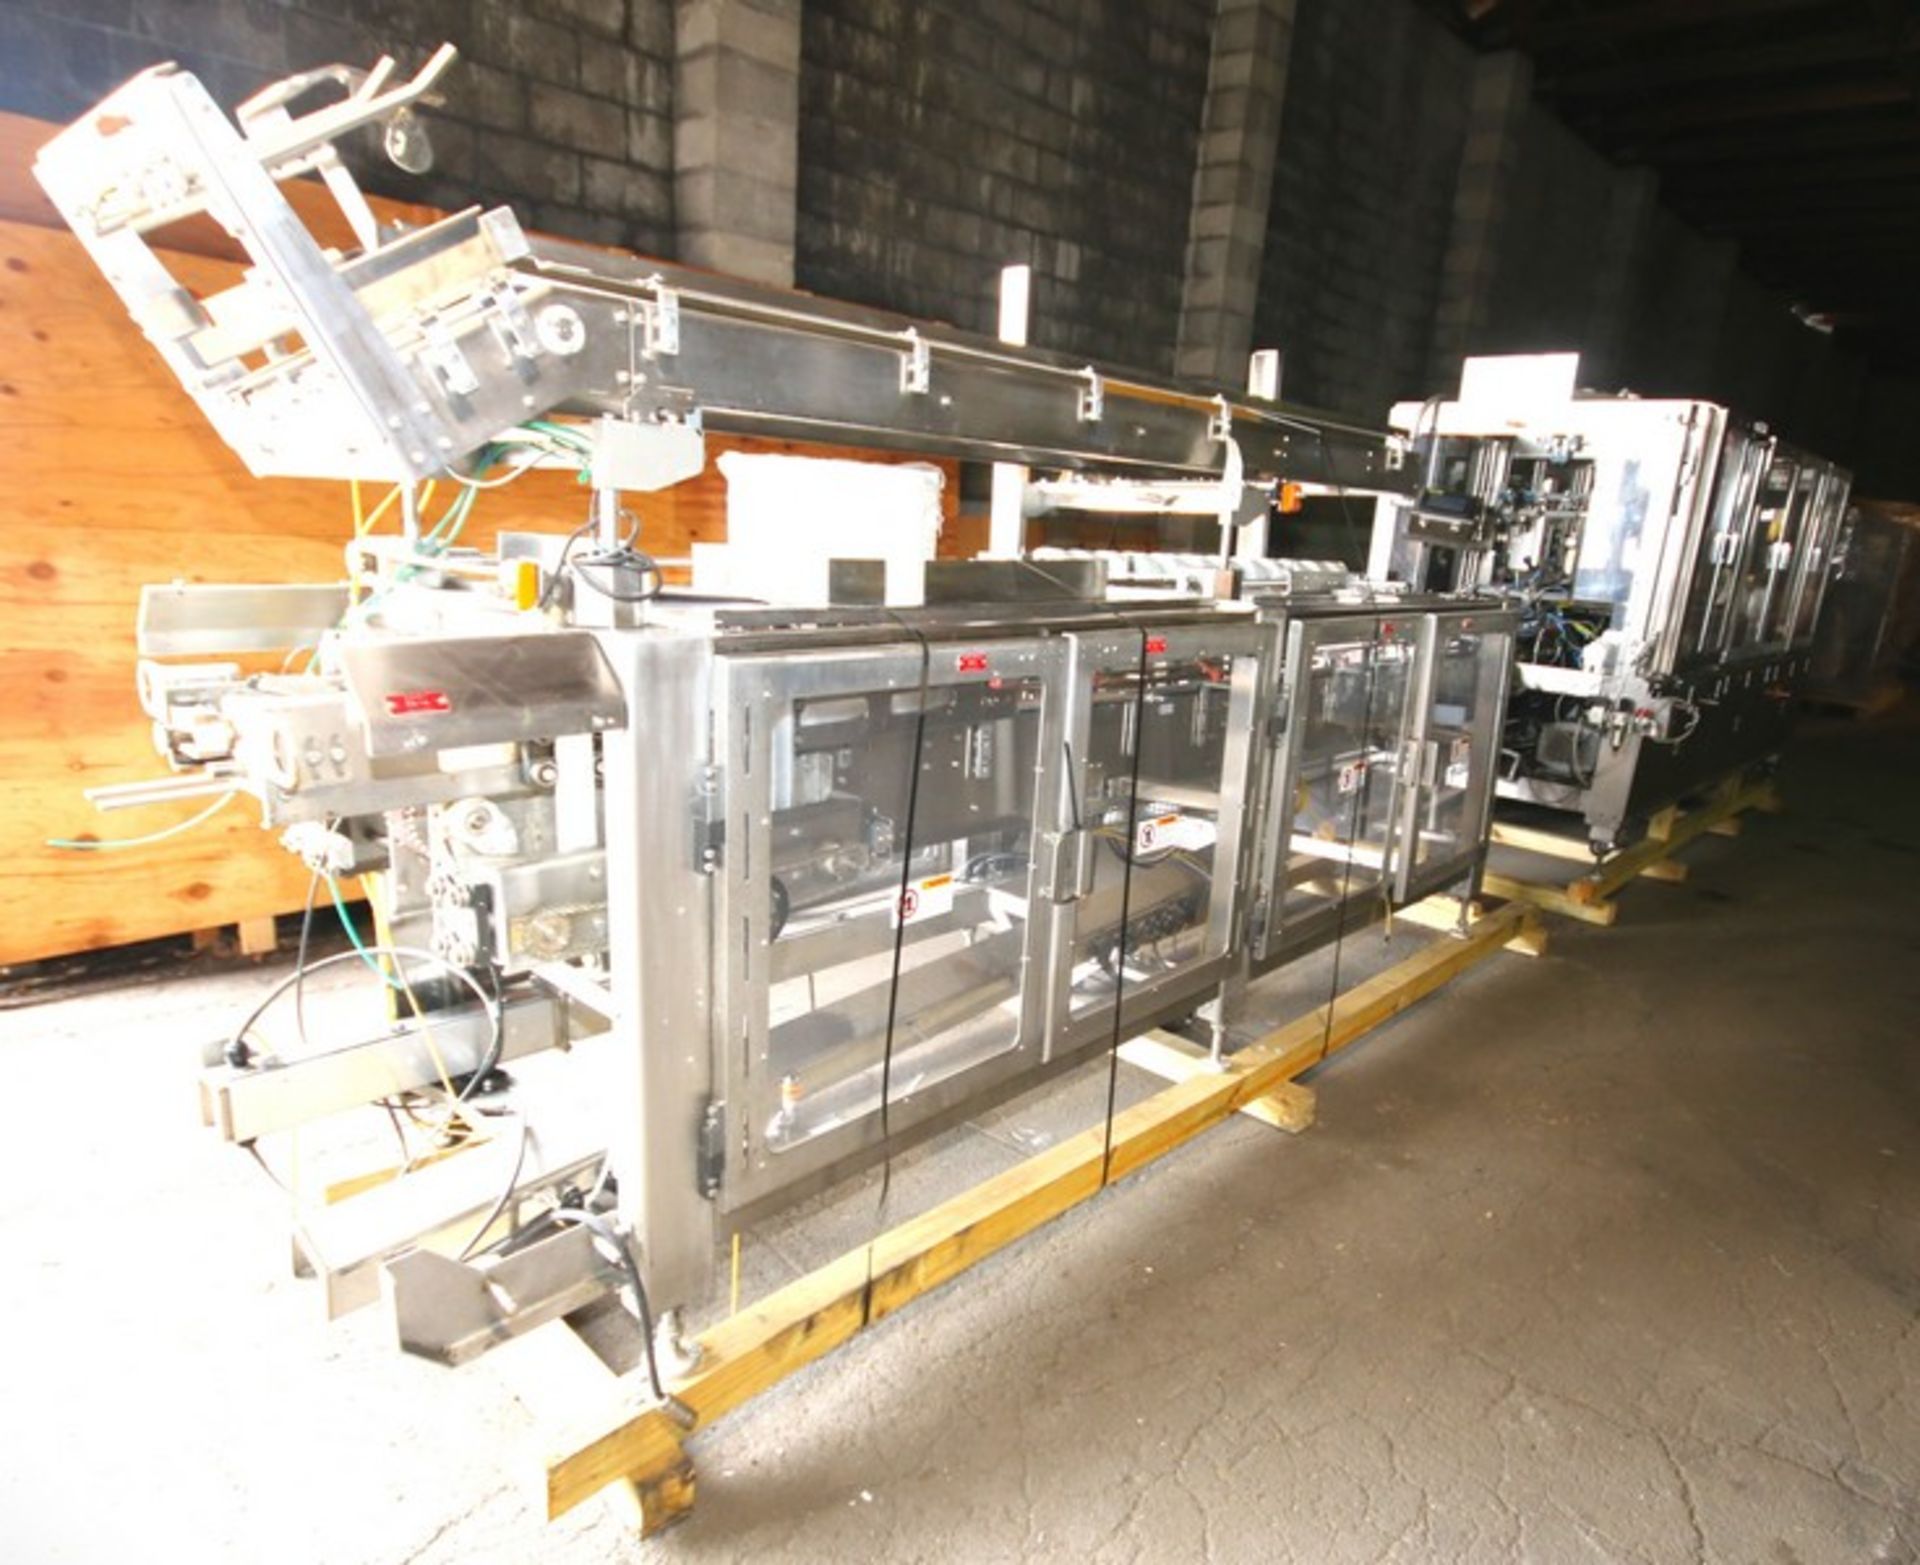 Adco Wrap Around Sleever, M/N 12WAS-2DO-WD, S/N 5172H2, 480 Volts, 3 Phase, with In Feed Conveyor - Image 12 of 15